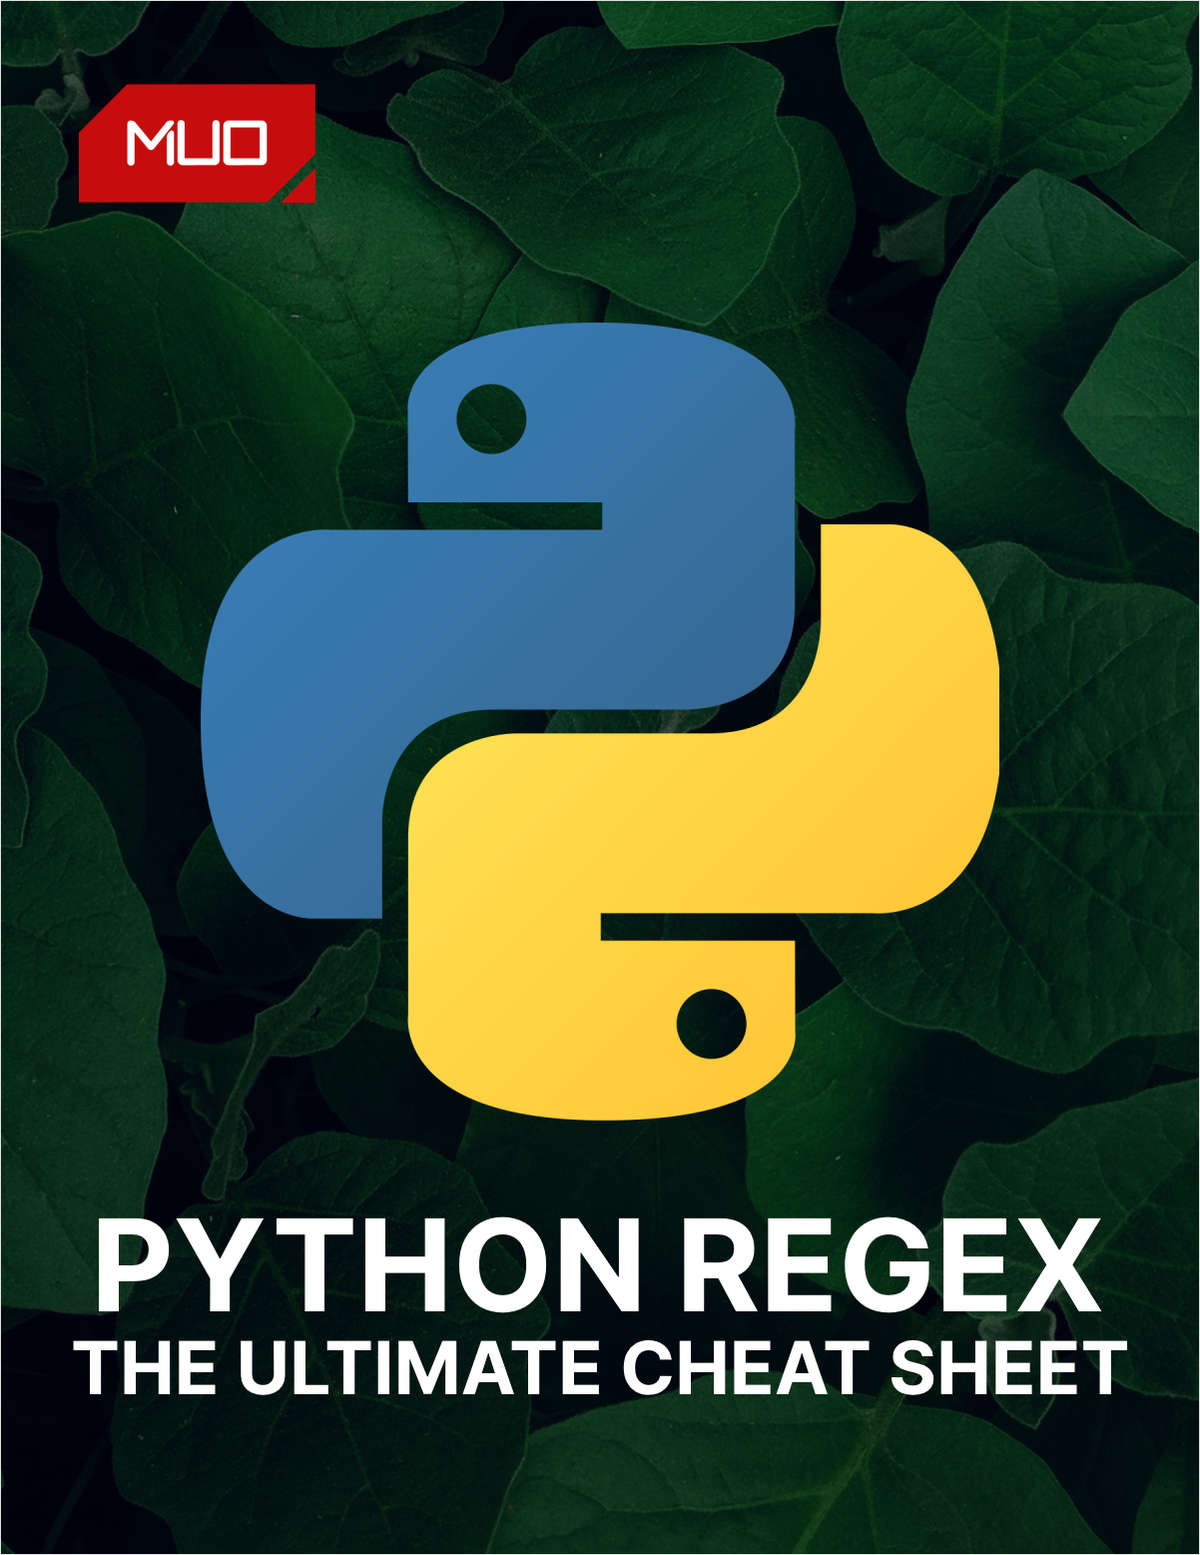 The Python RegEx Cheat Sheet for Budding Programmers